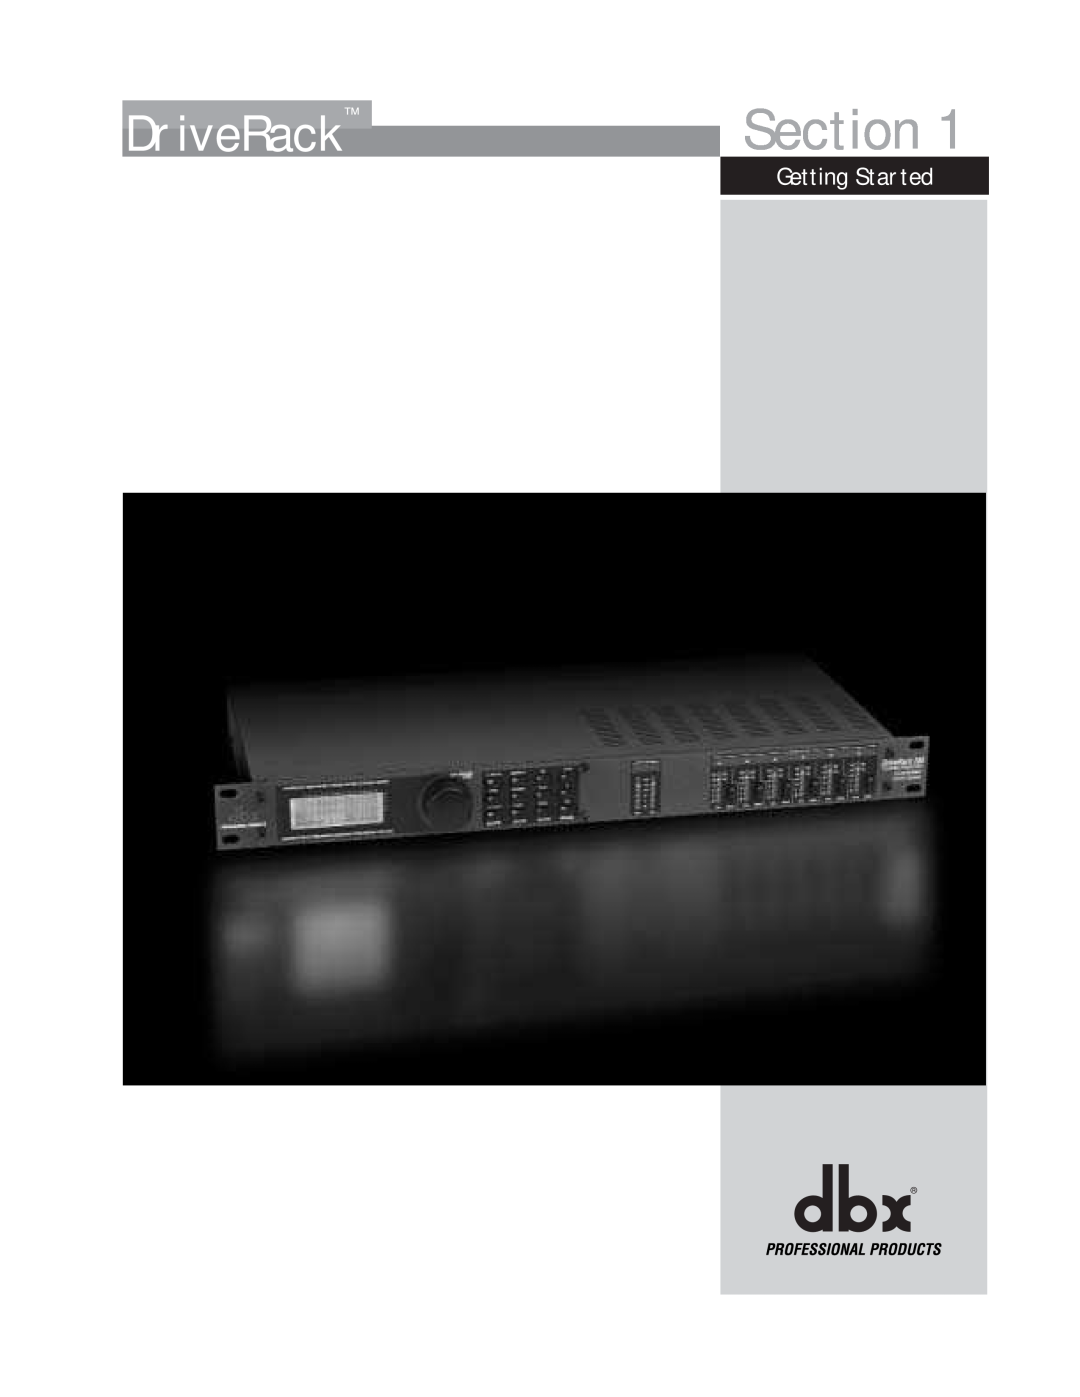 dbx Pro 260 user manual Section, Getting Started, DriveRack 